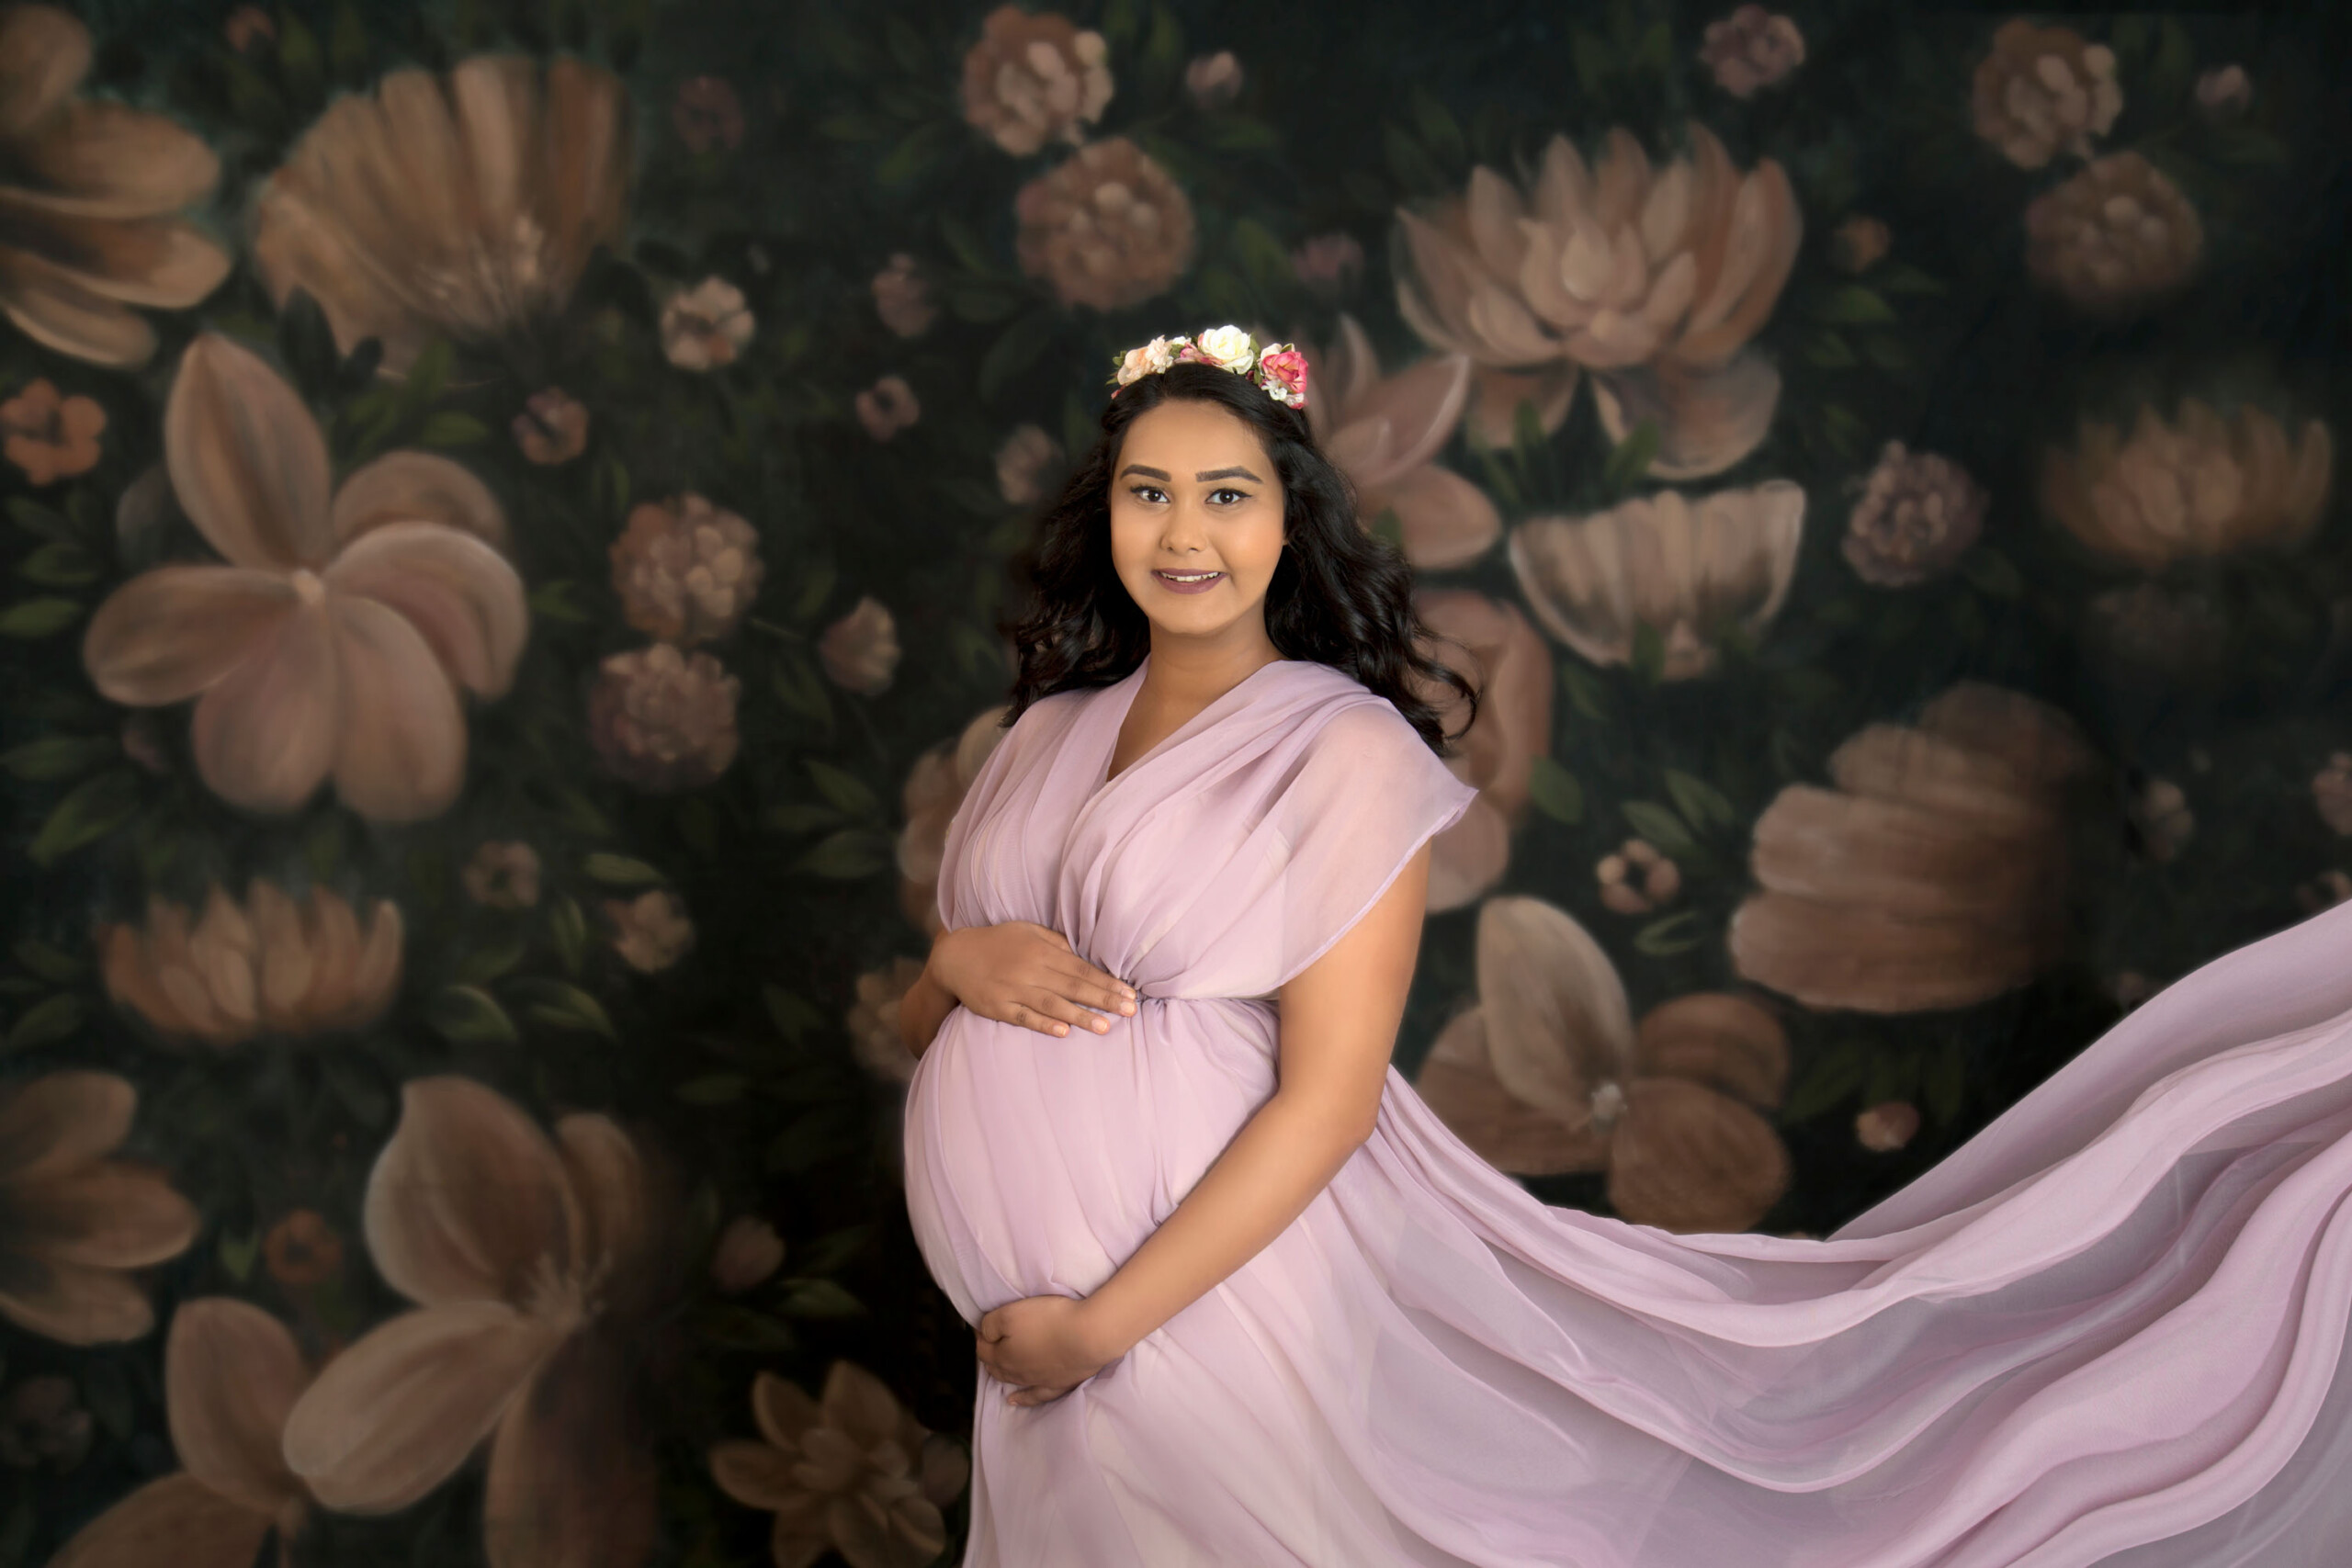 Idea Maternity Shoot Photos and Images & Pictures